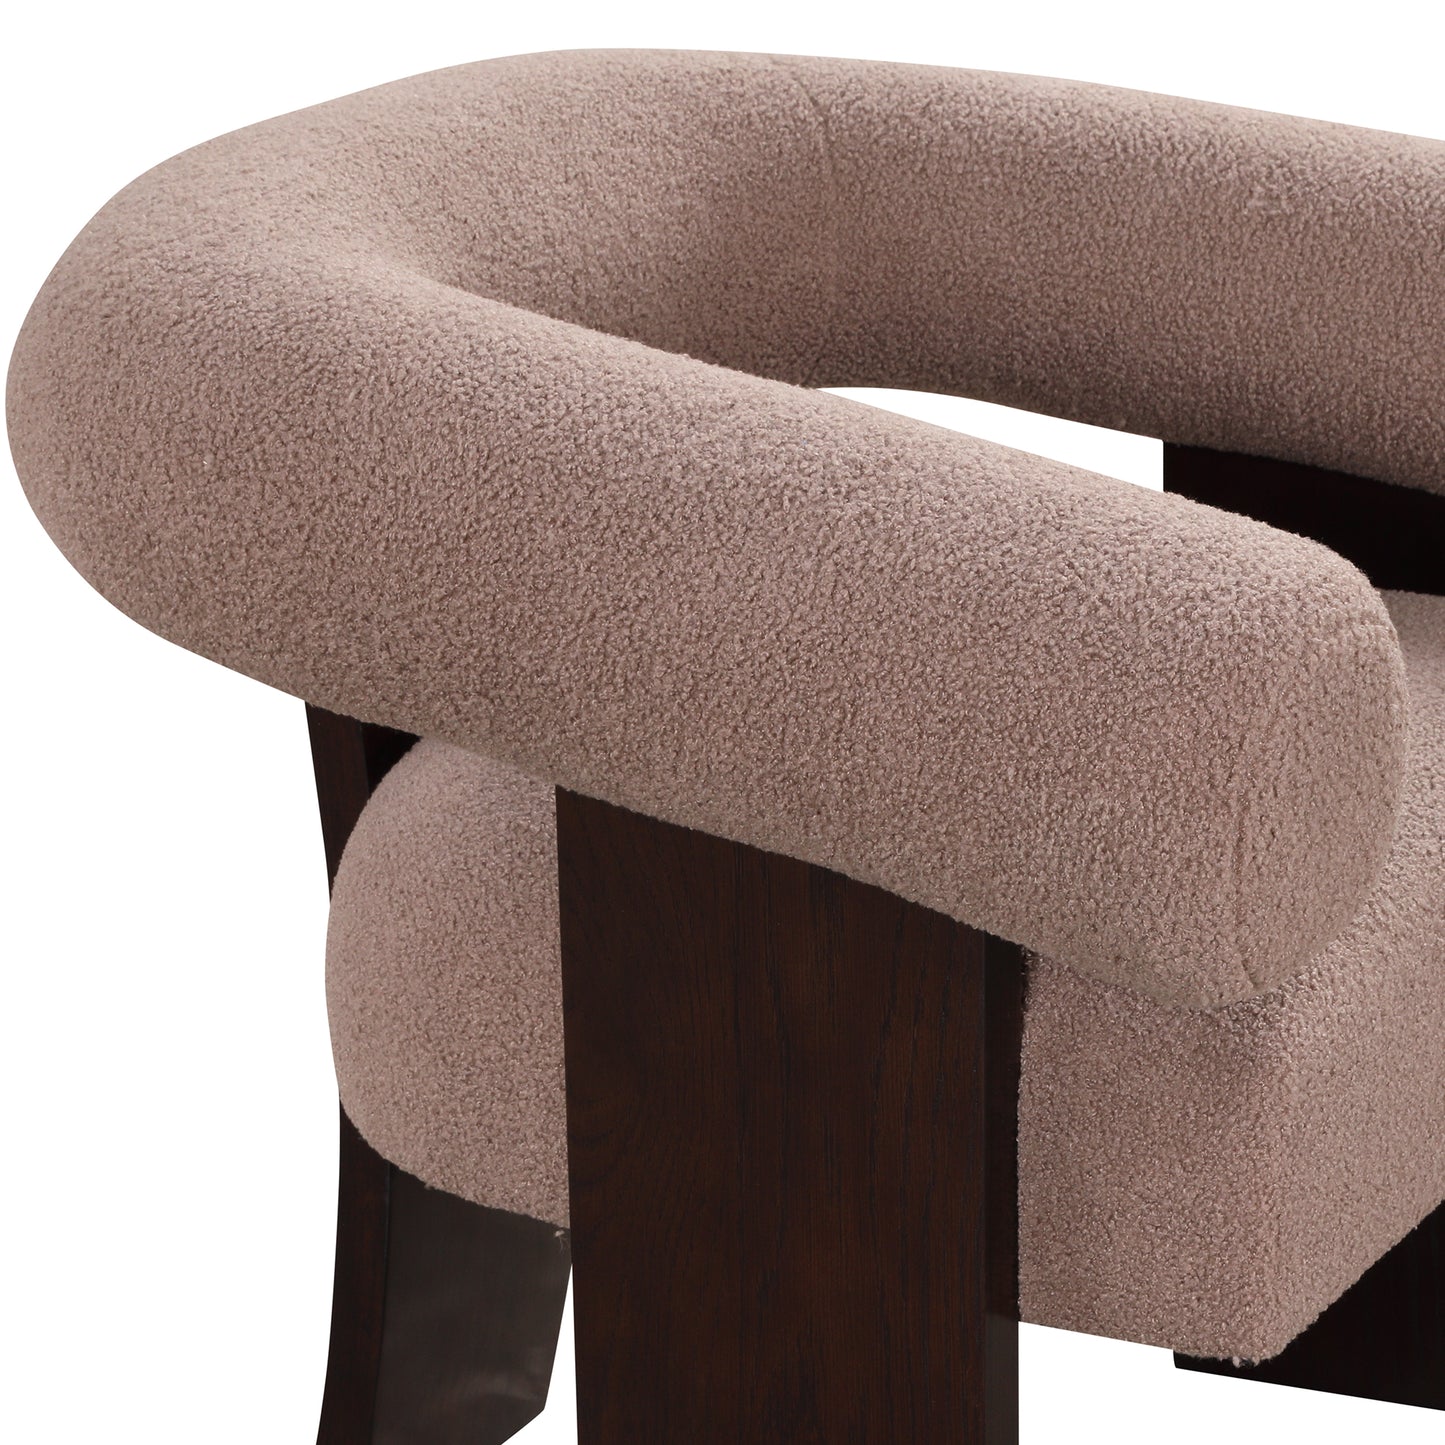 The Curved Wishbone Frame Accent Chair